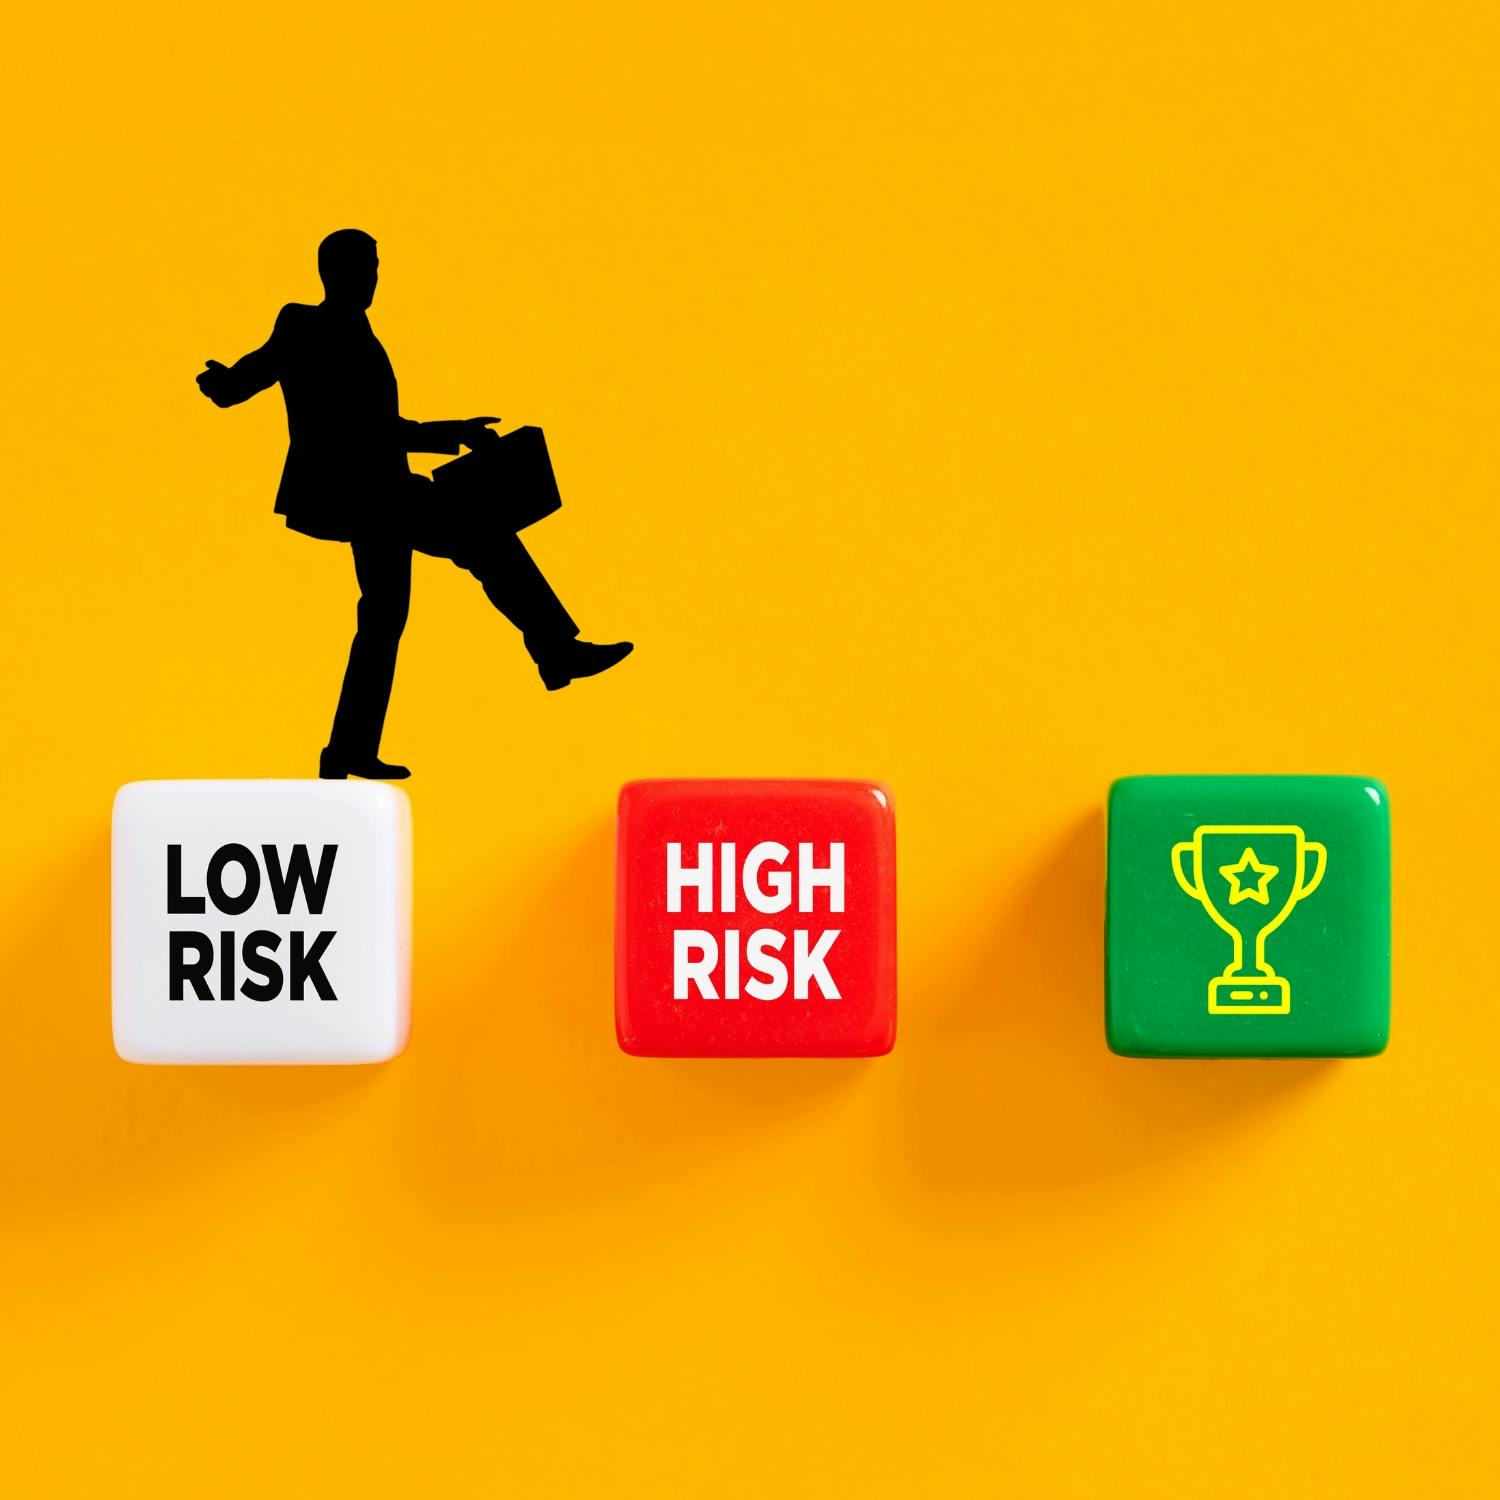 How to Decide Whether to Take That Risk